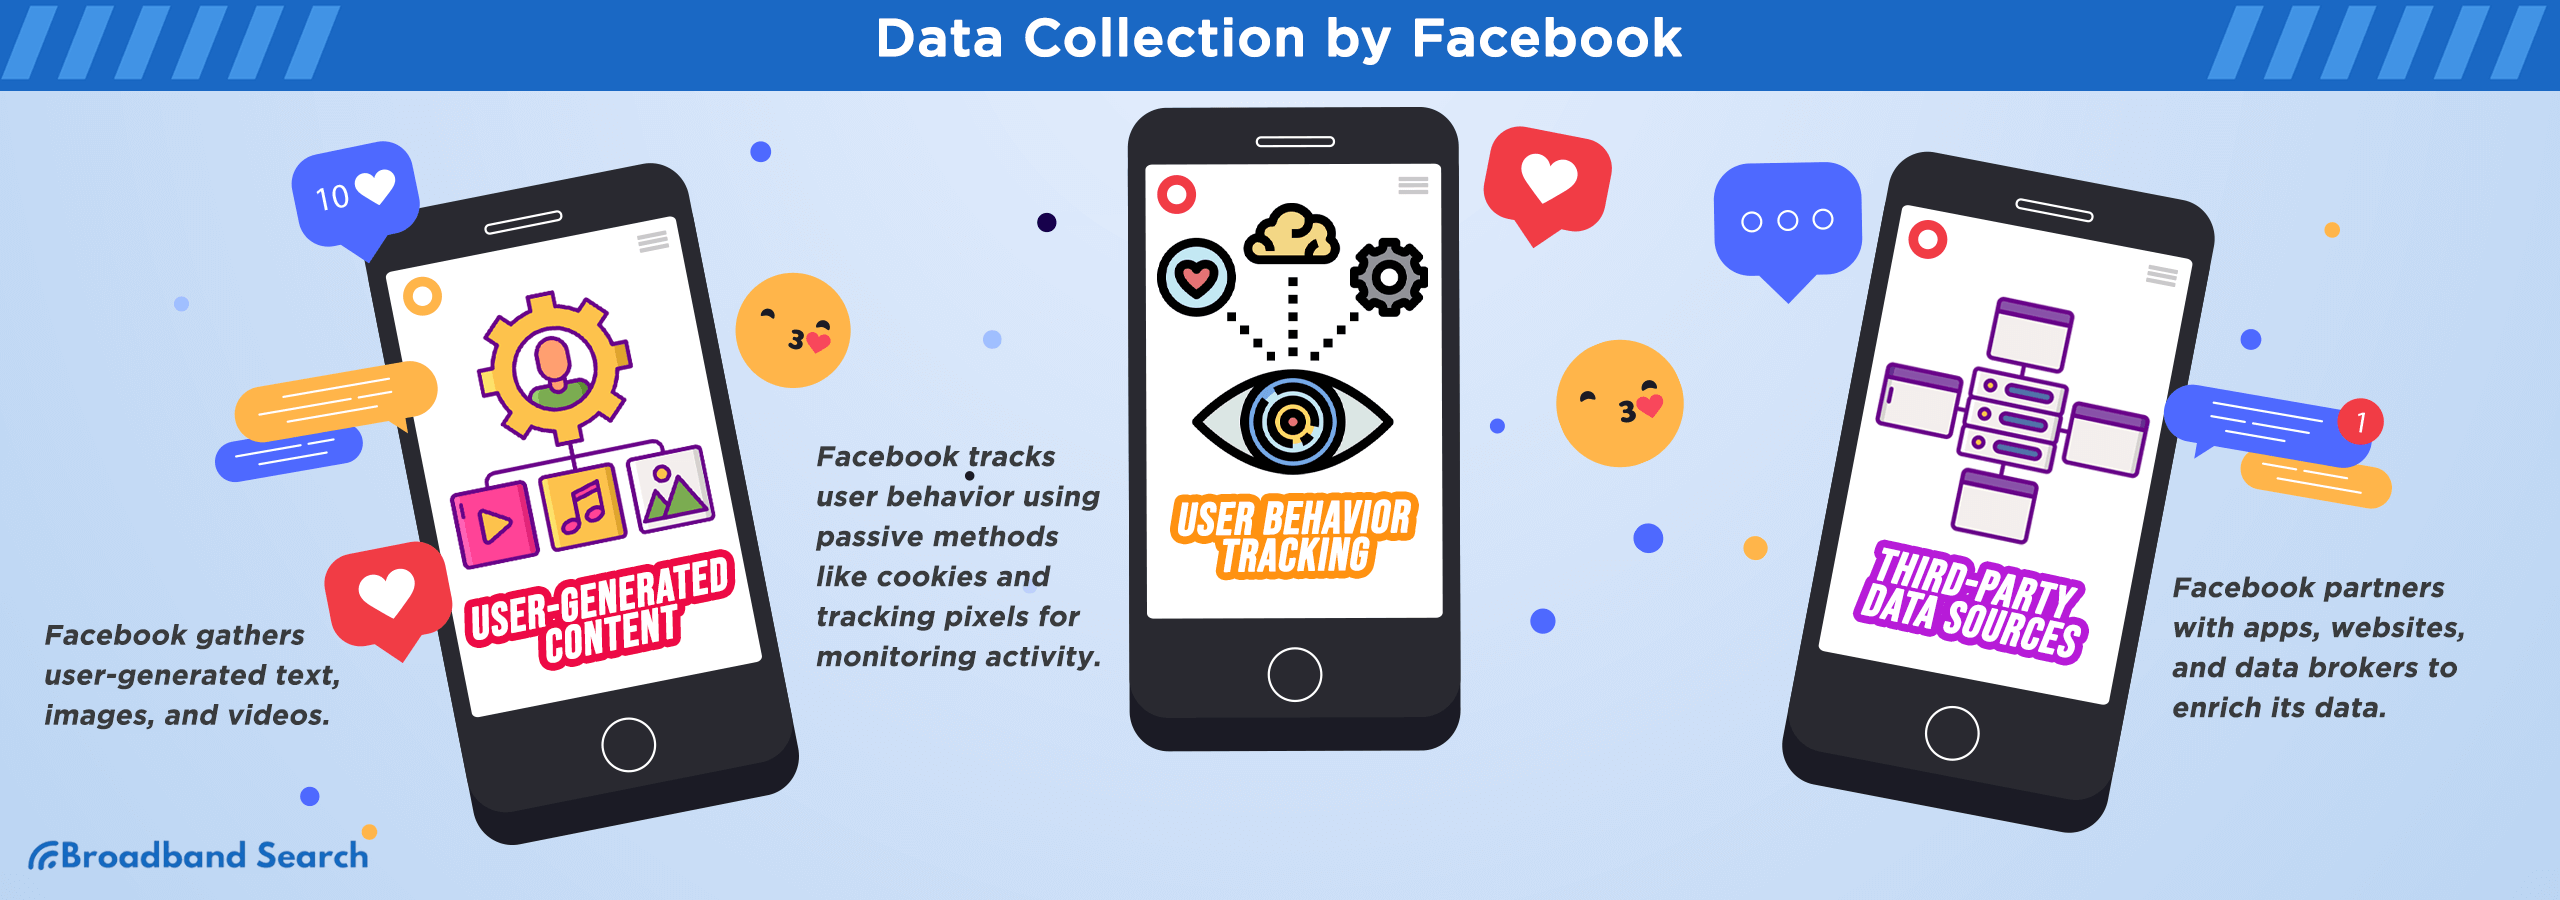 Data collection methods used by facebook